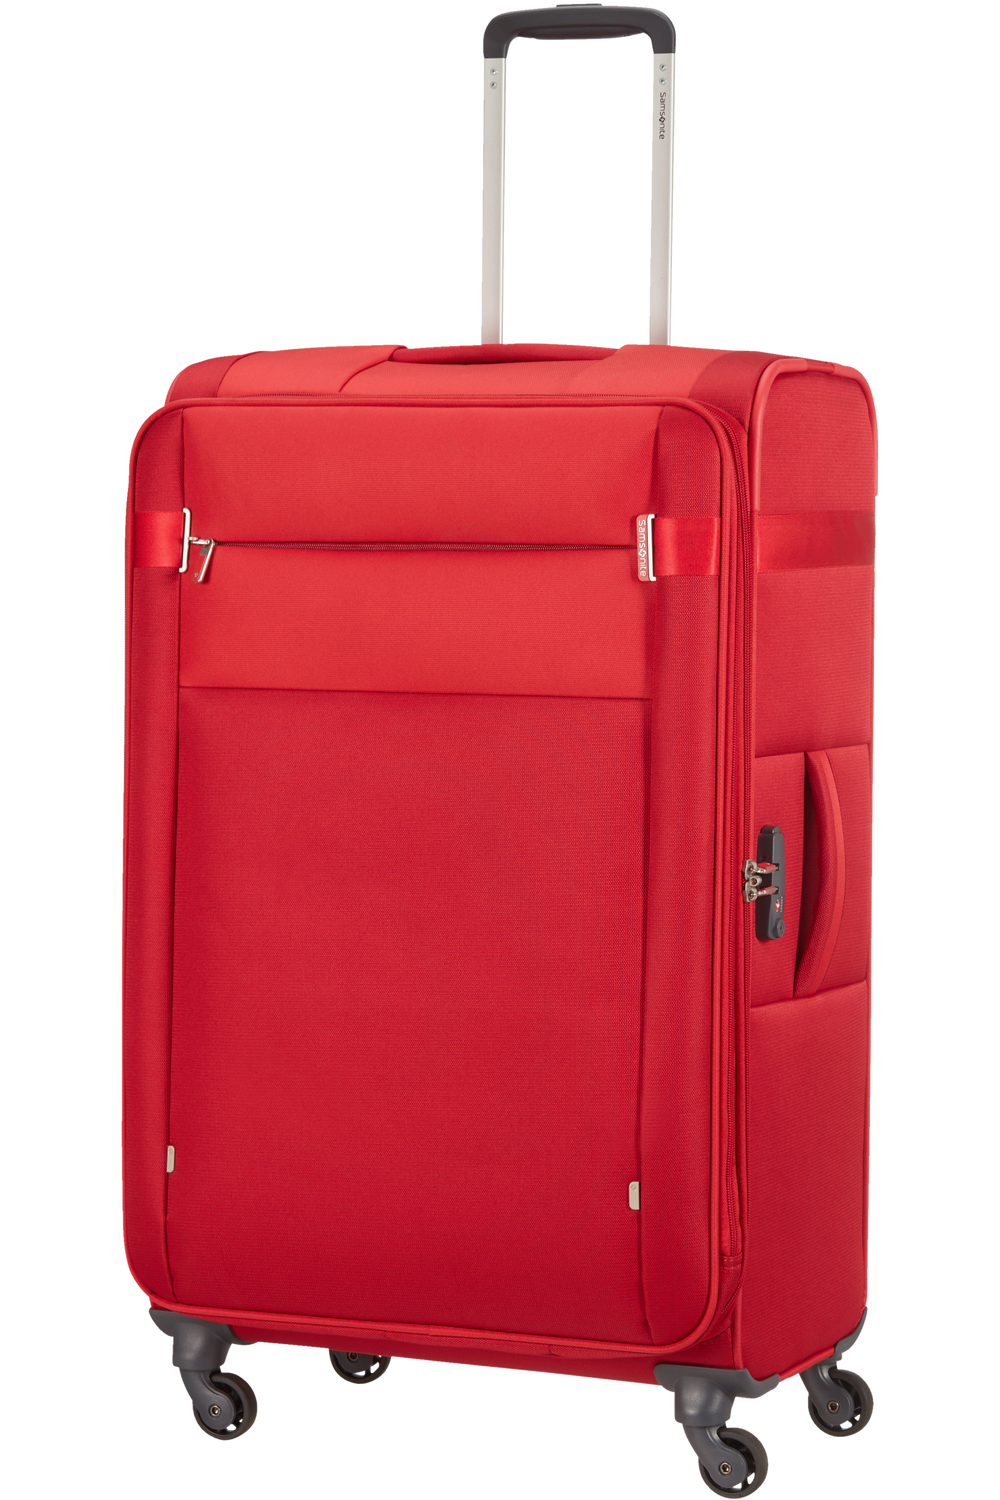 https://paulsbags.it/wp-content/uploads/2021/06/SA79202-Trolley-grande-Samsonite-Citybeat-4ruote-Euro149-Cm-78x47x30-33-Rosso5.png